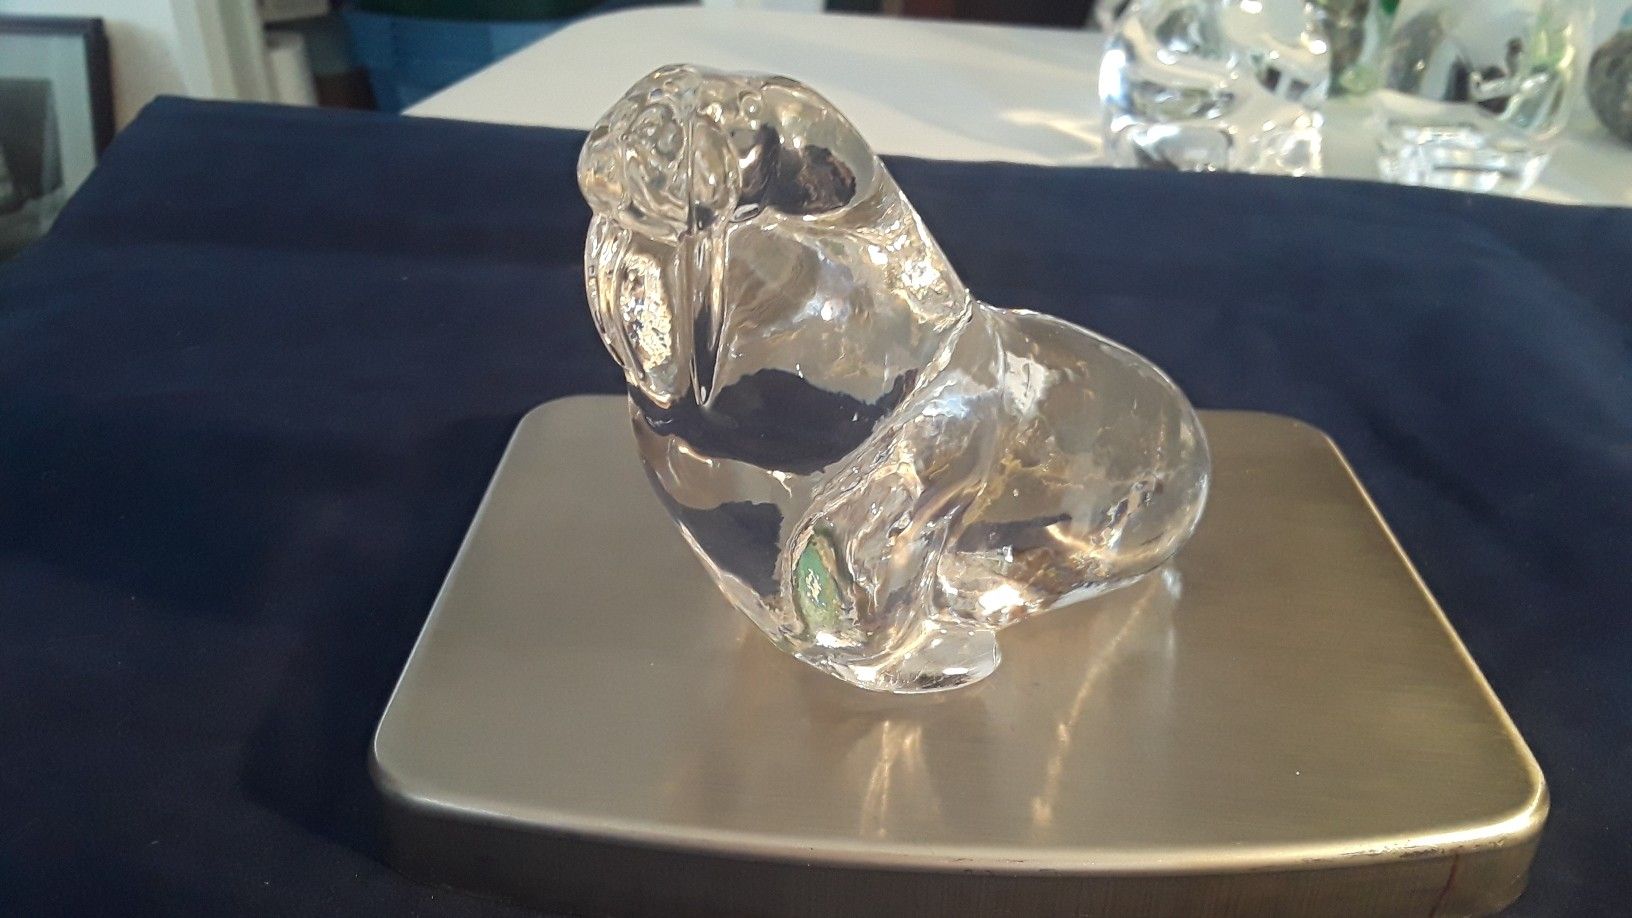 ROYAL DOULTON DANBURY MINT SIGNED ART CRYSTAL WALRUS PAPERWEIGHT FIGURINE 3-1/4×3-1/2